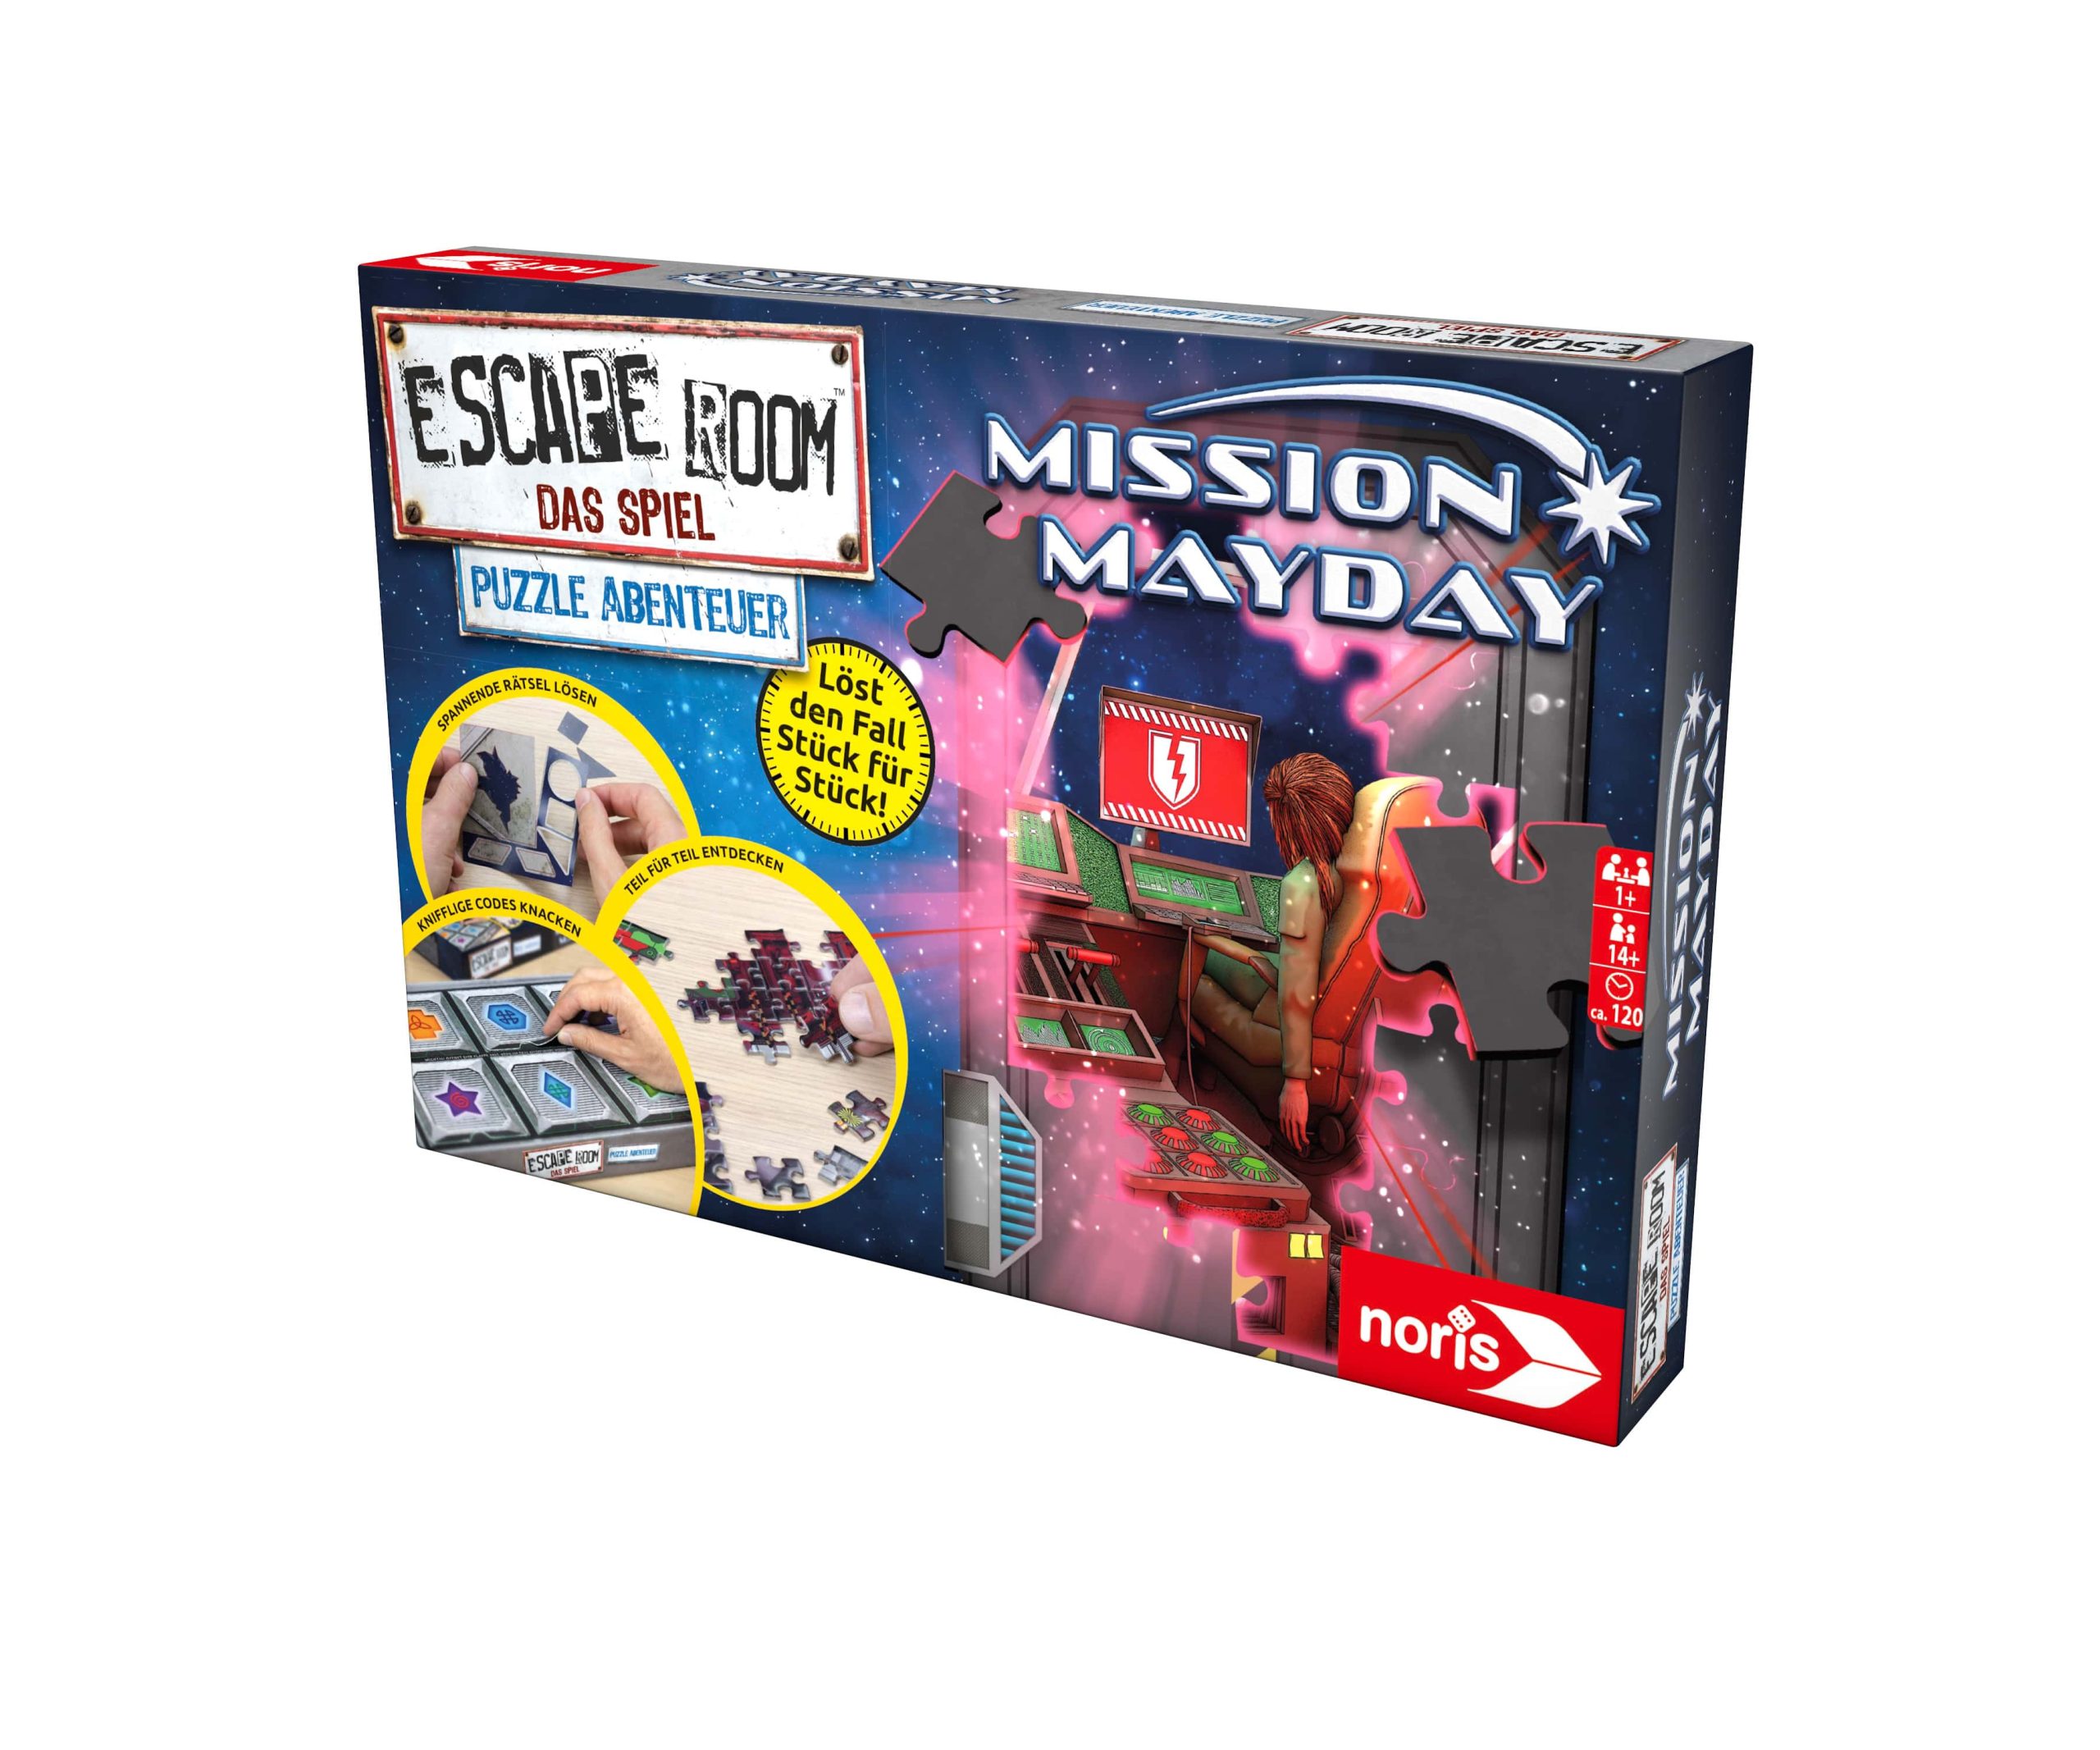 Noris Spiele Escape Room: Mission Mayday Puzzle Abenteuer 3 (Escape Room: Mission Mayday Puzzle Adventures 3)